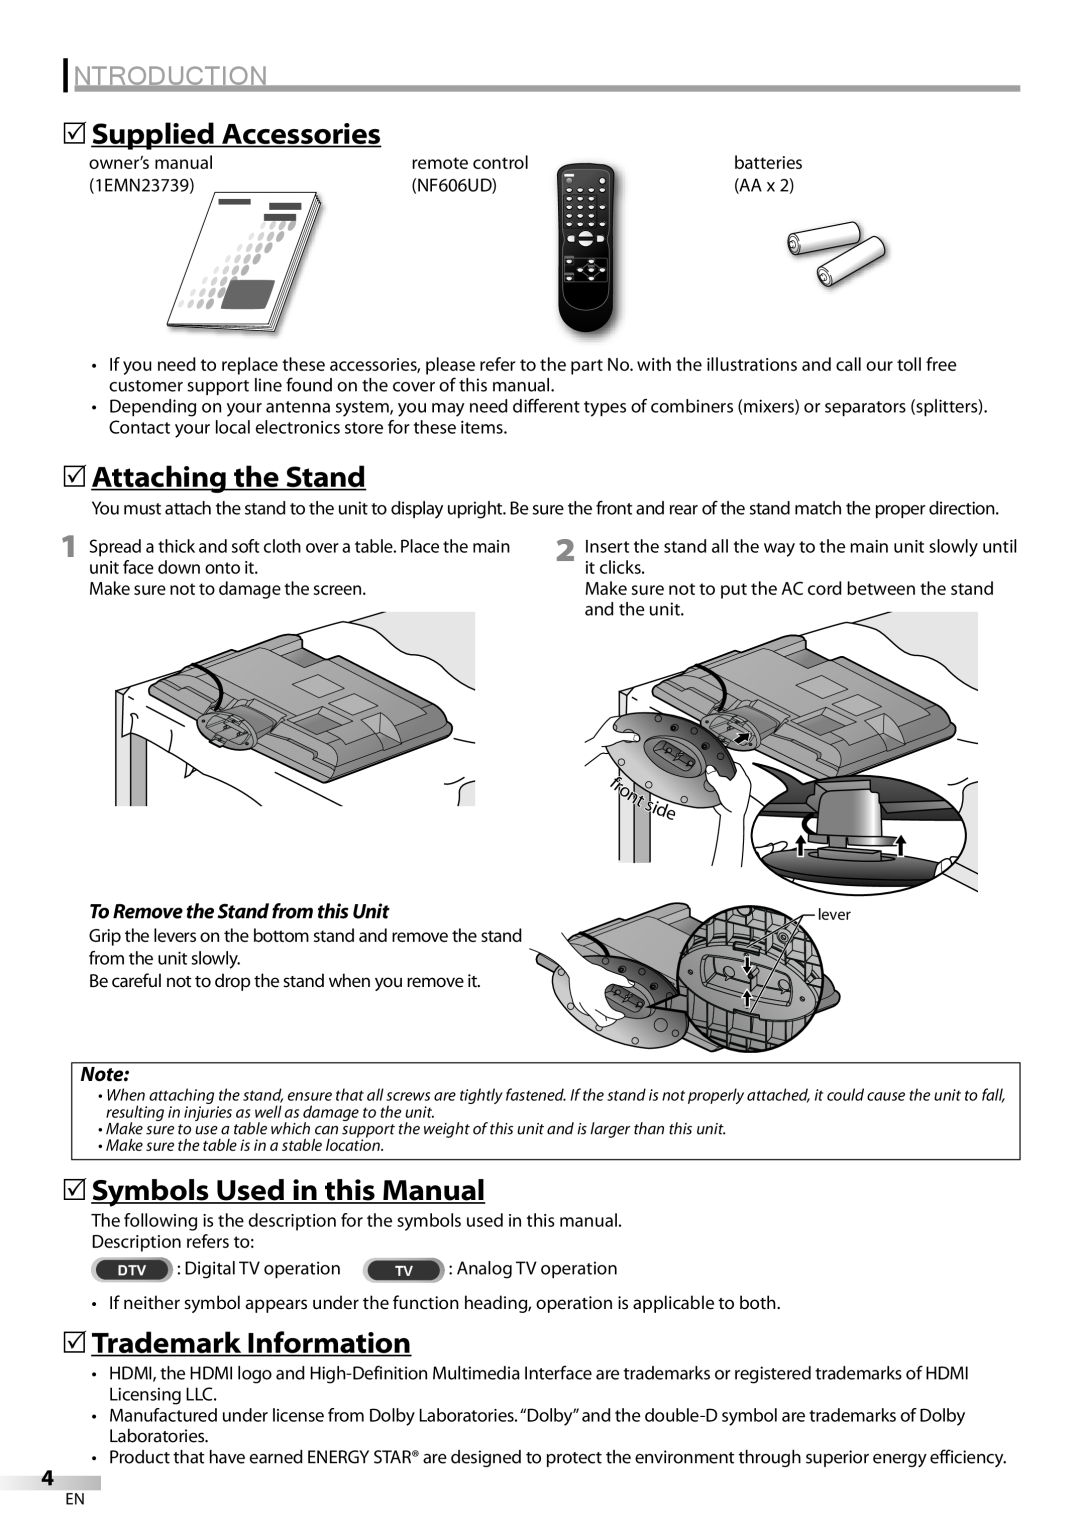 Sylvania LC225SC9 5Supplied Accessories, 5Attaching the Stand, 5Symbols Used in this Manual, 5Trademark Information 